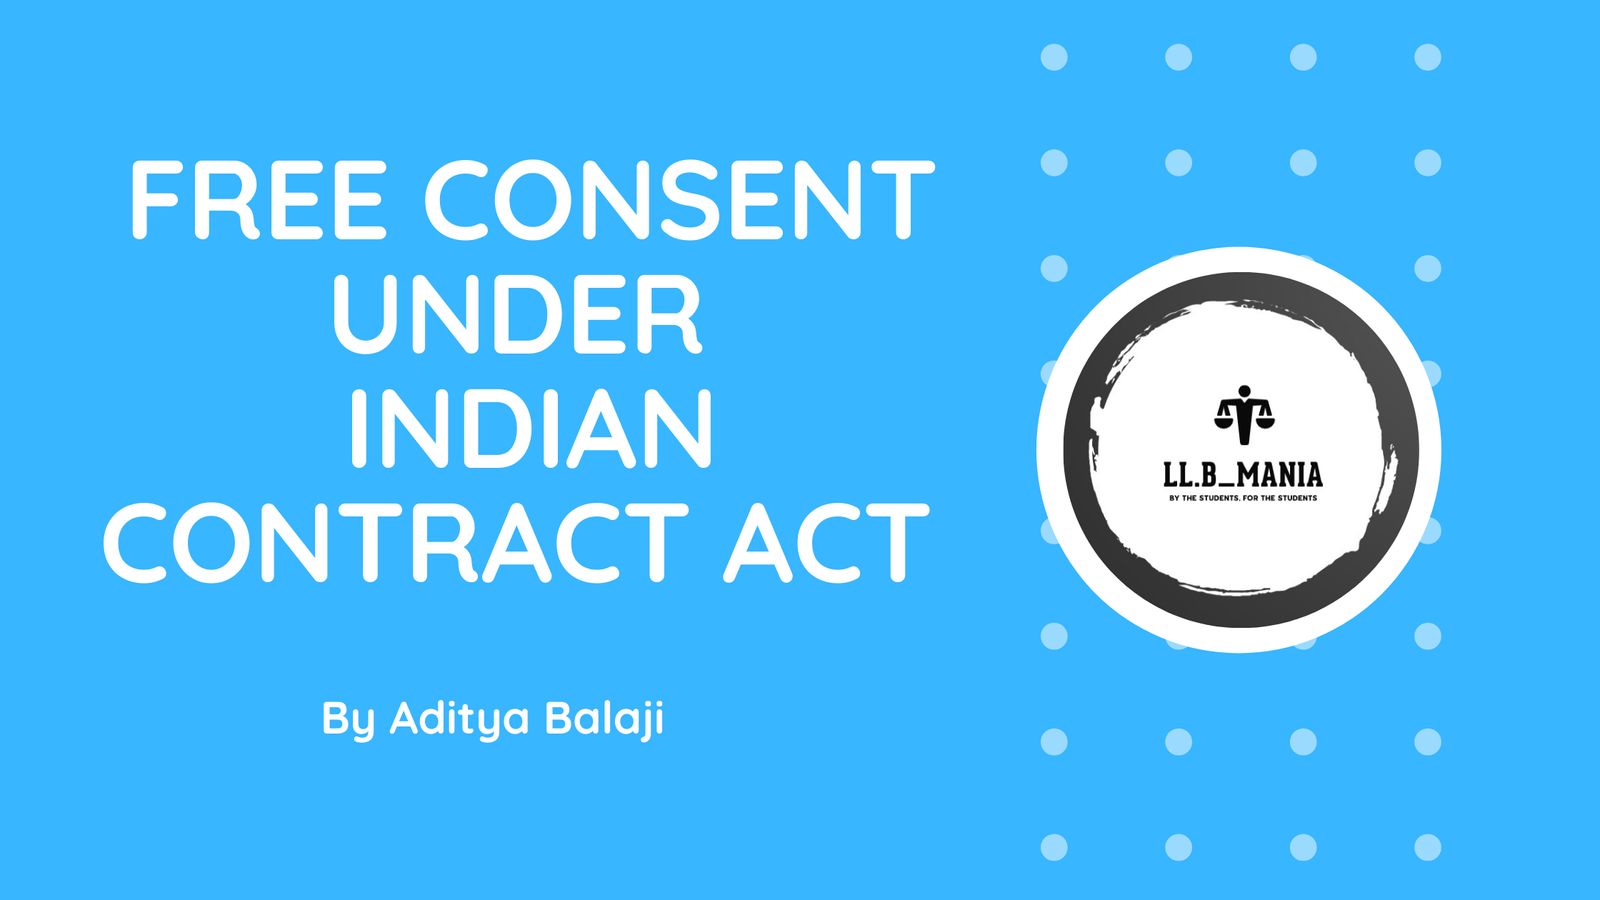 Free Consent under Indian Contract Act